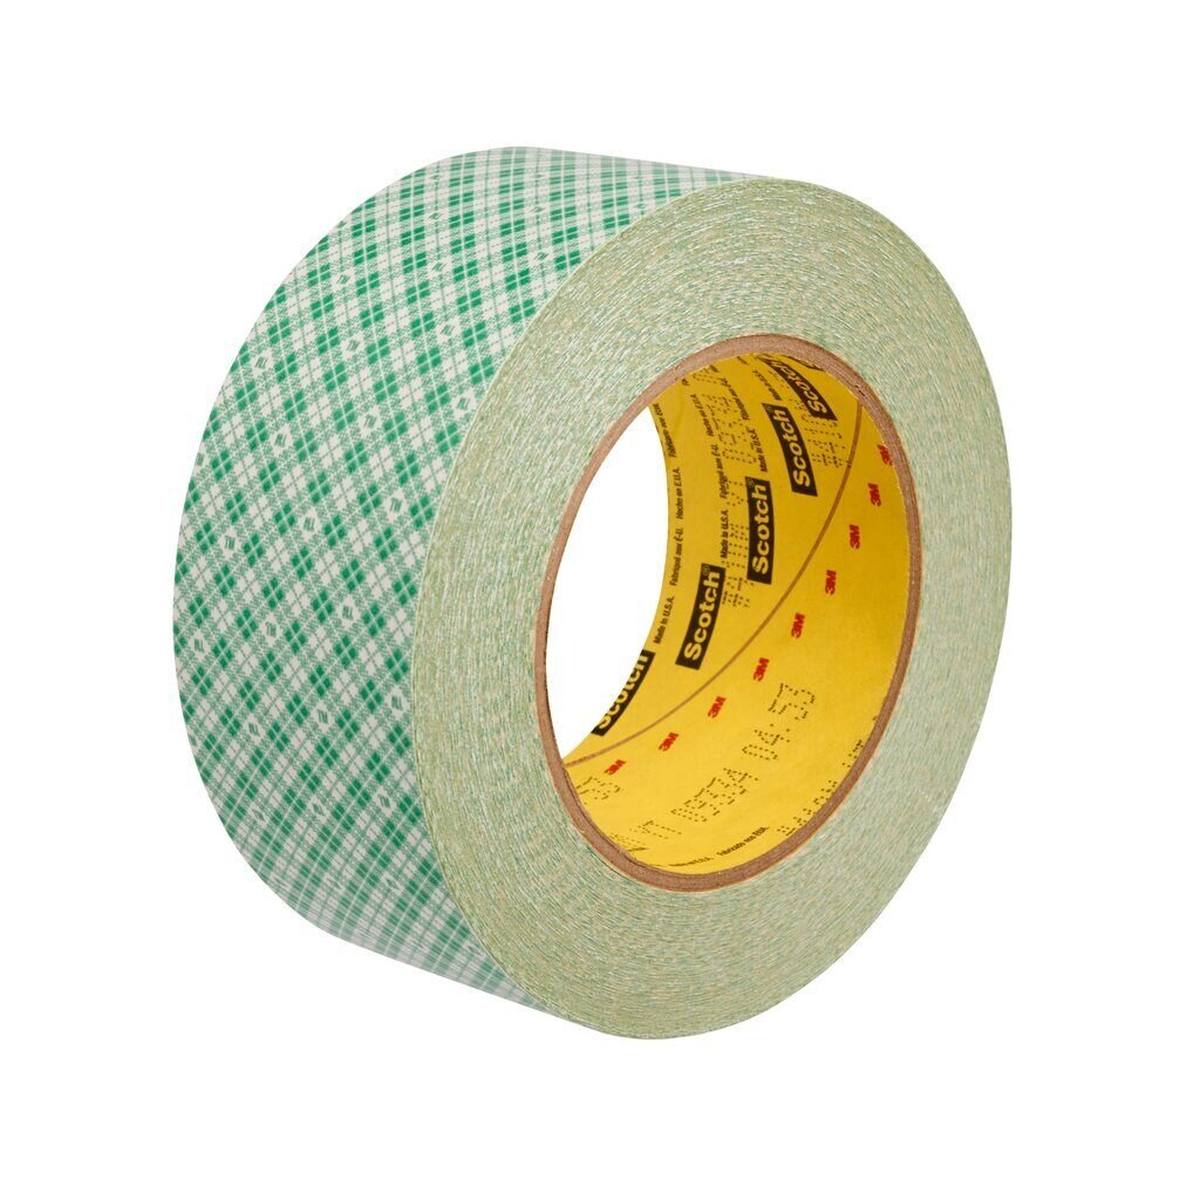 3M Double-sided adhesive tape with non-woven paper backing 410M, white, 25.4 mm x 33 m, 0.13 mm